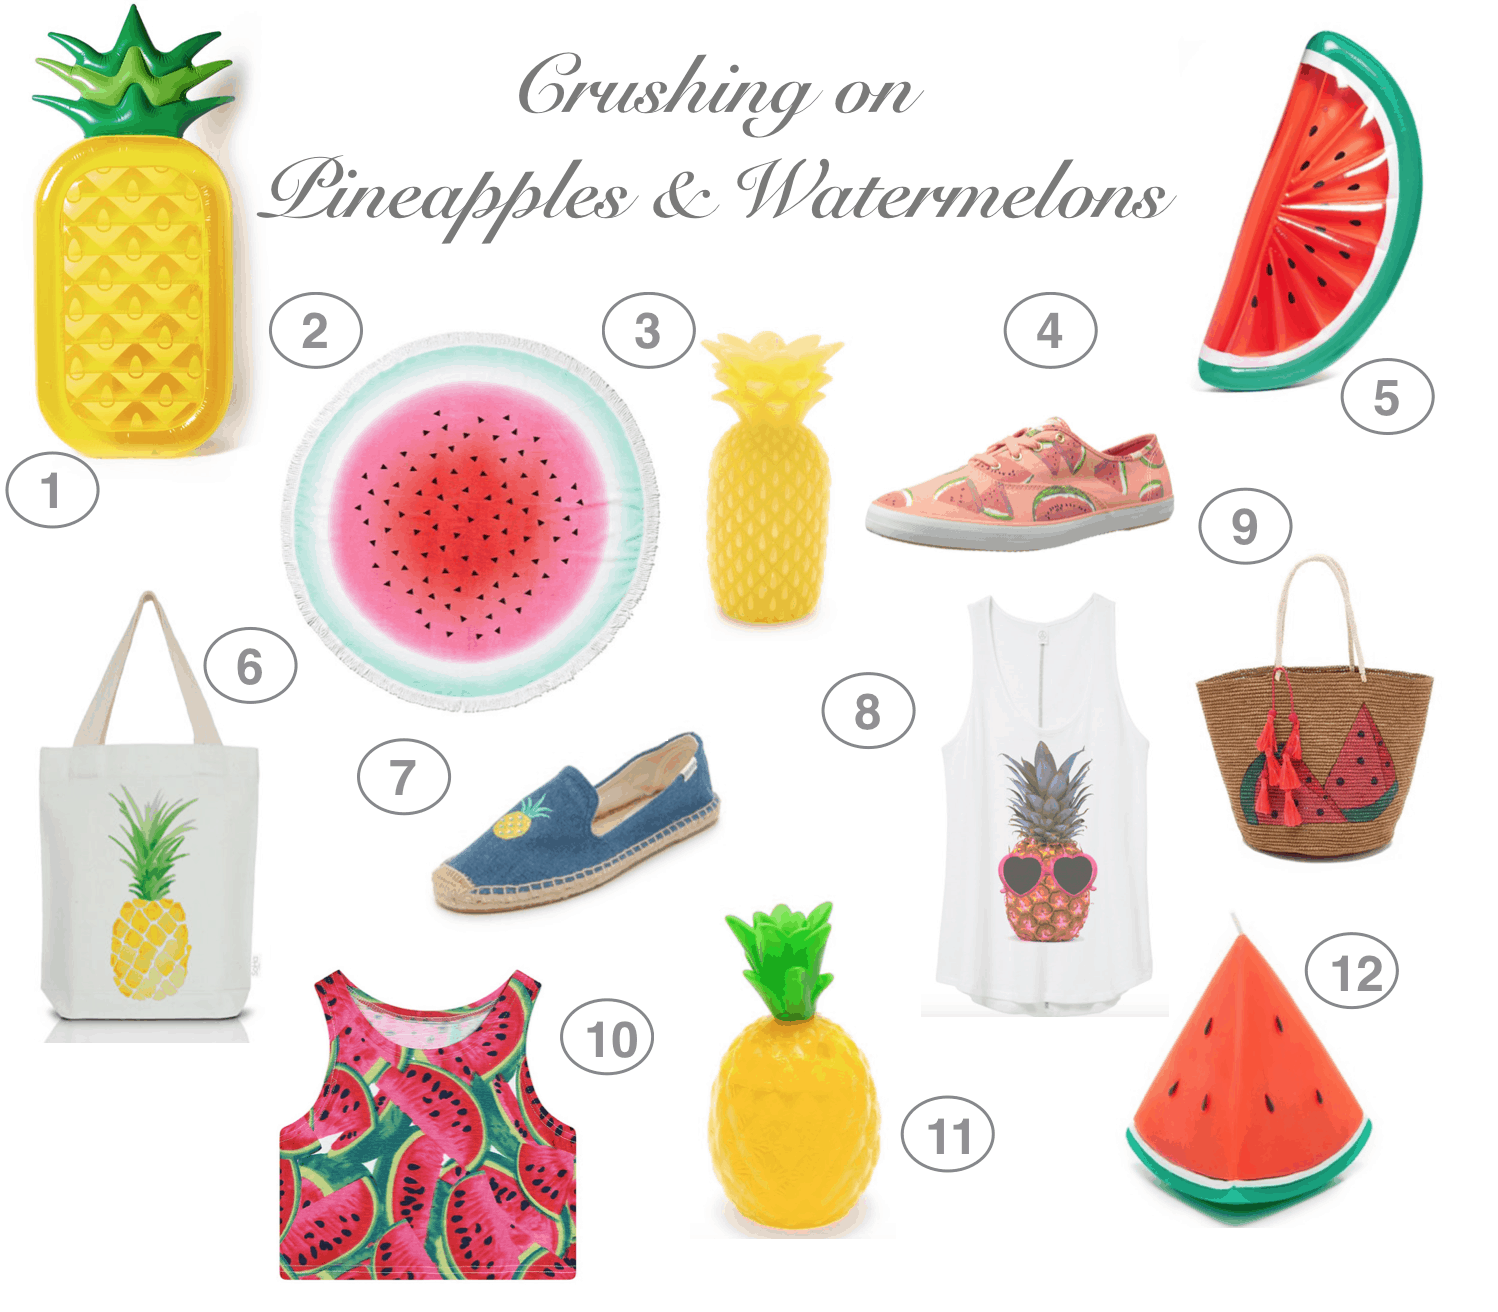 Dress Up Buttercup // A Houston-based fashion and inspiration blog developed to daily inspire your own personal style by Dede Raad | Crushing On Pineapples & Watermelons